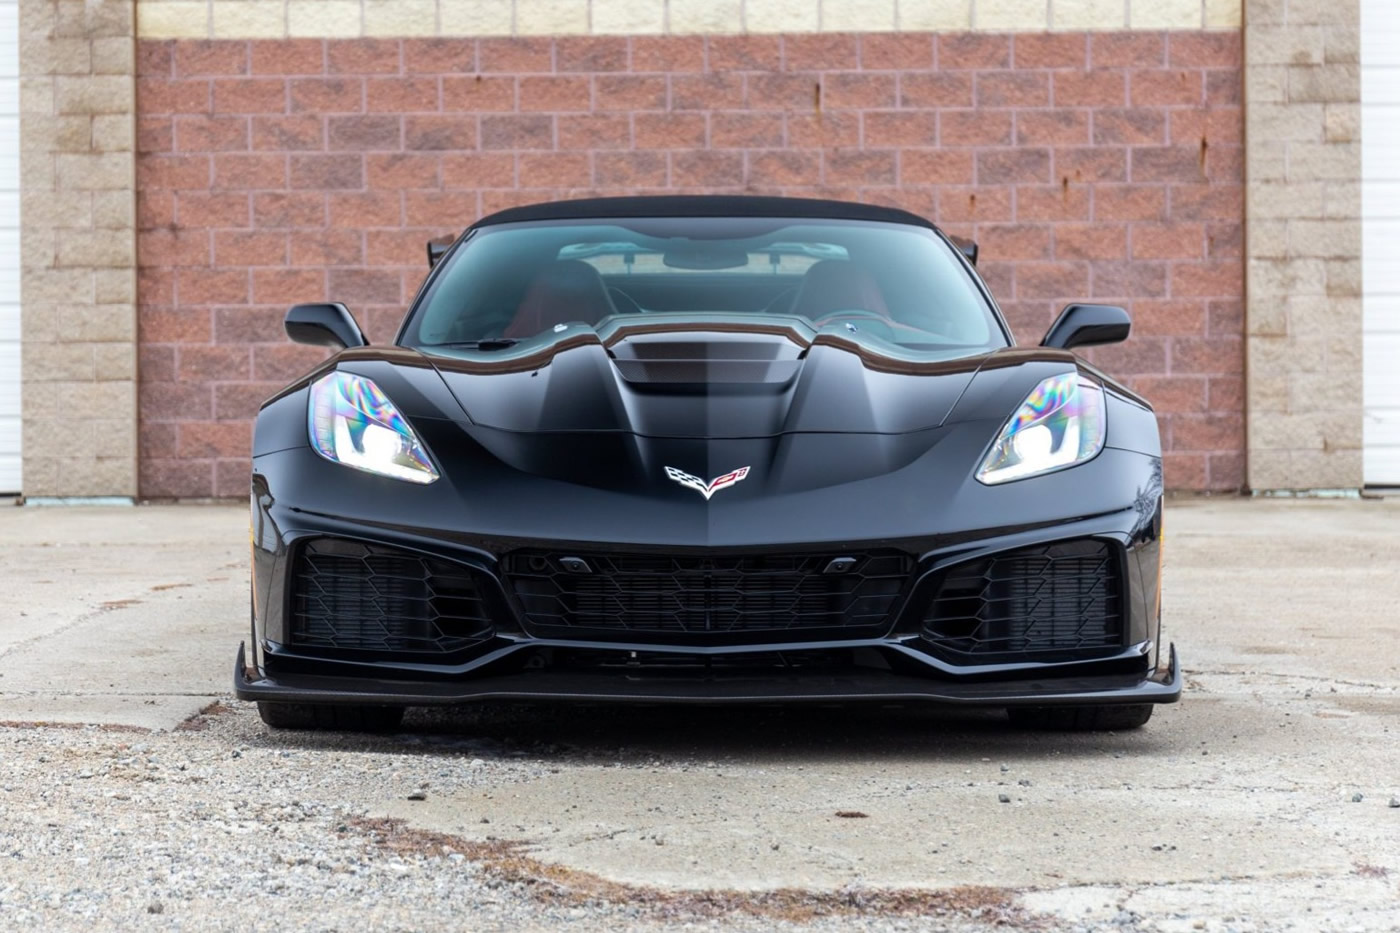 FOR SALE] This One of Only One 2019 Corvette ZR1 Could Be Yours! - Corvette  Action Center